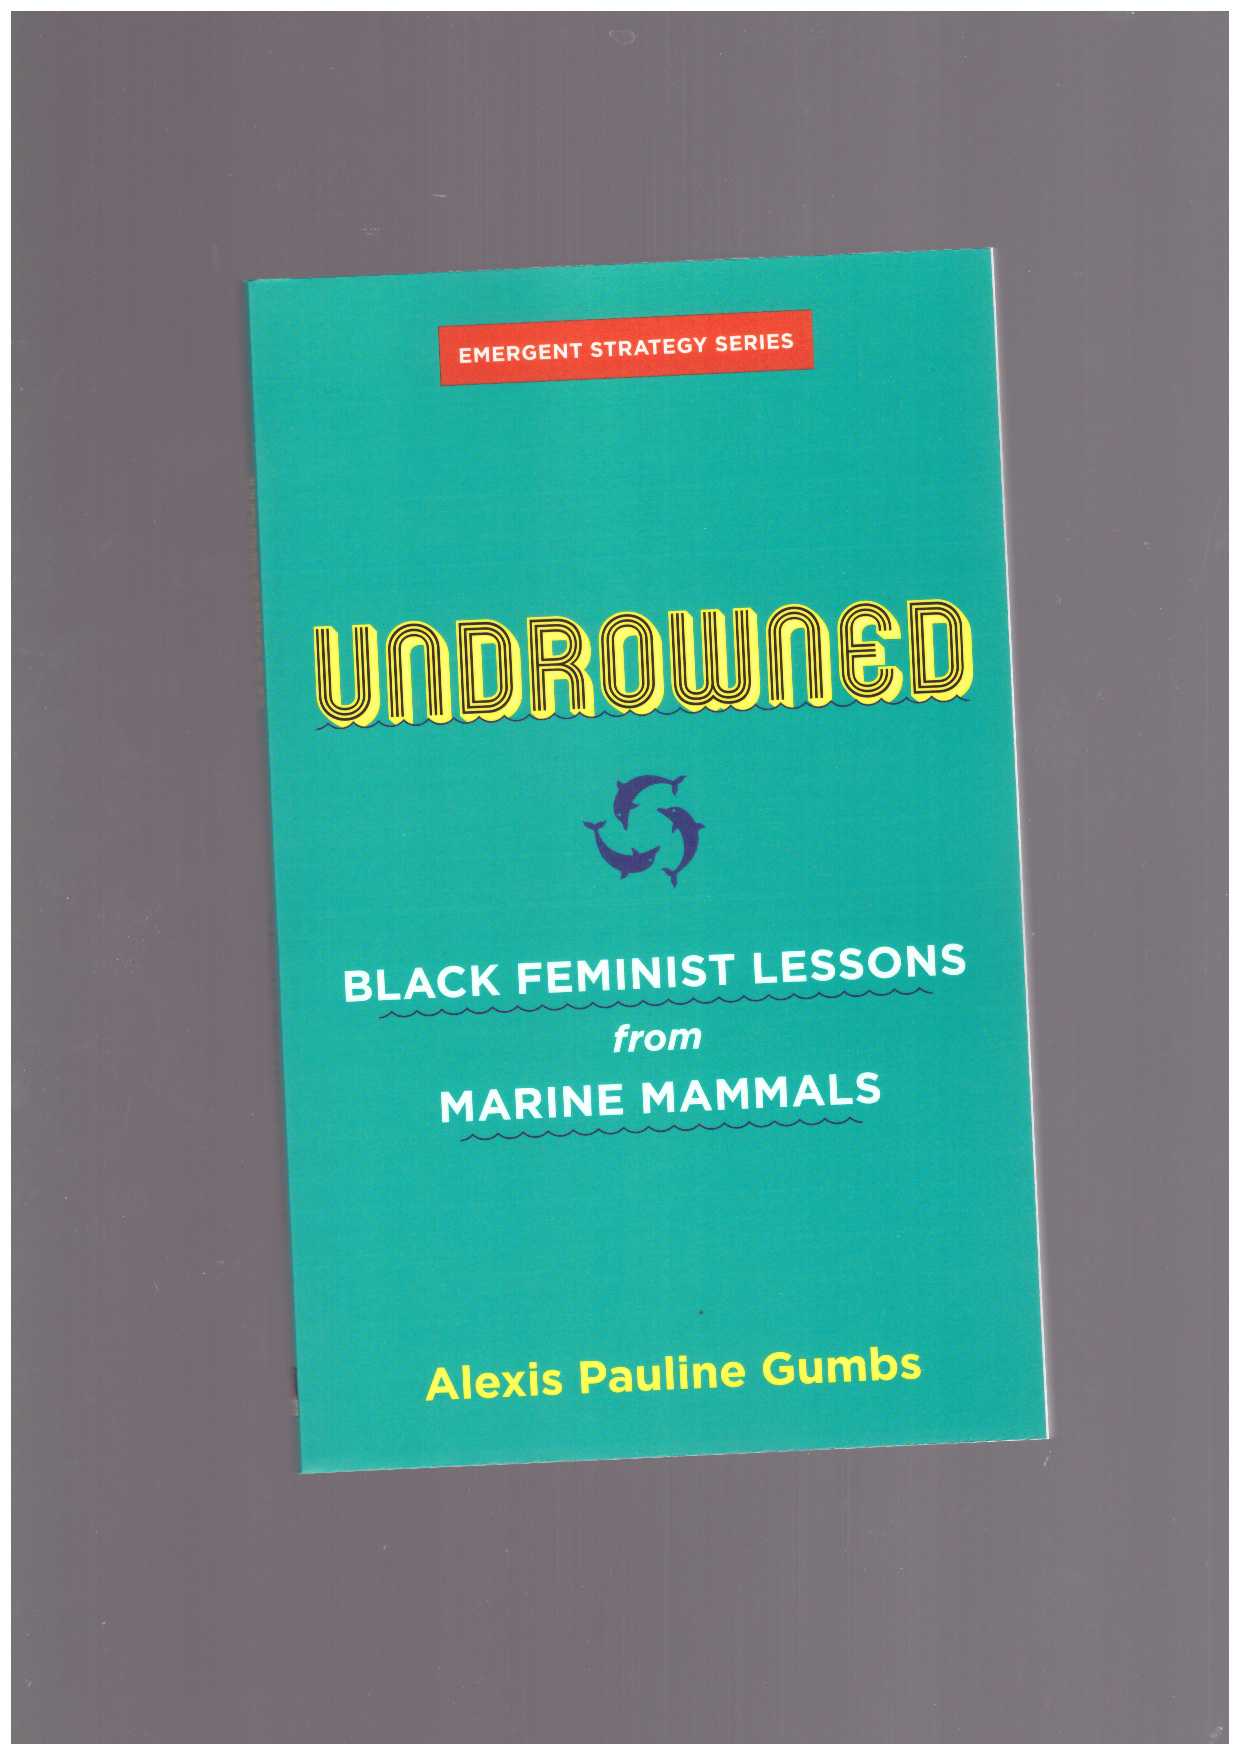 GUMBS, Alexis Pauline - Undrowned: Black Feminist Lessons from Marine Mammals